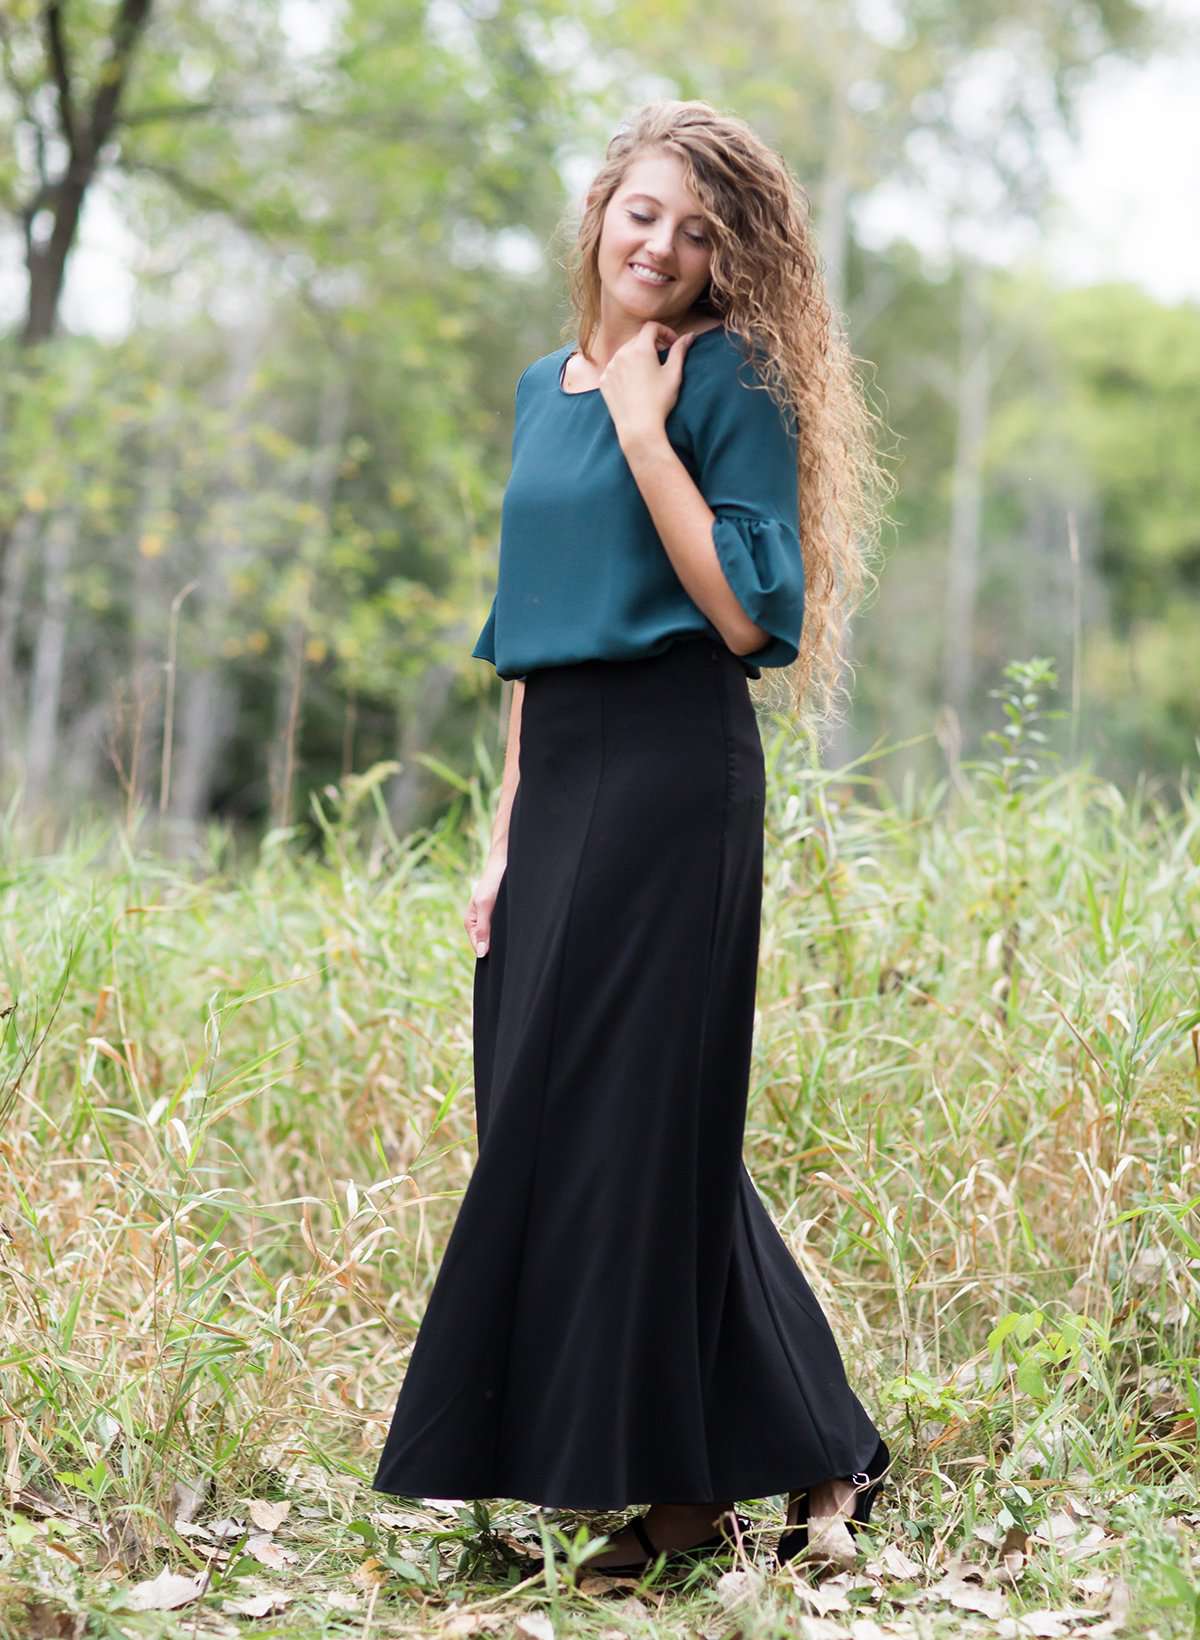 Woman wearing a black, dressy church skirt with panels and a side zipper. This long skirt has panels and a flowy bottom as well.